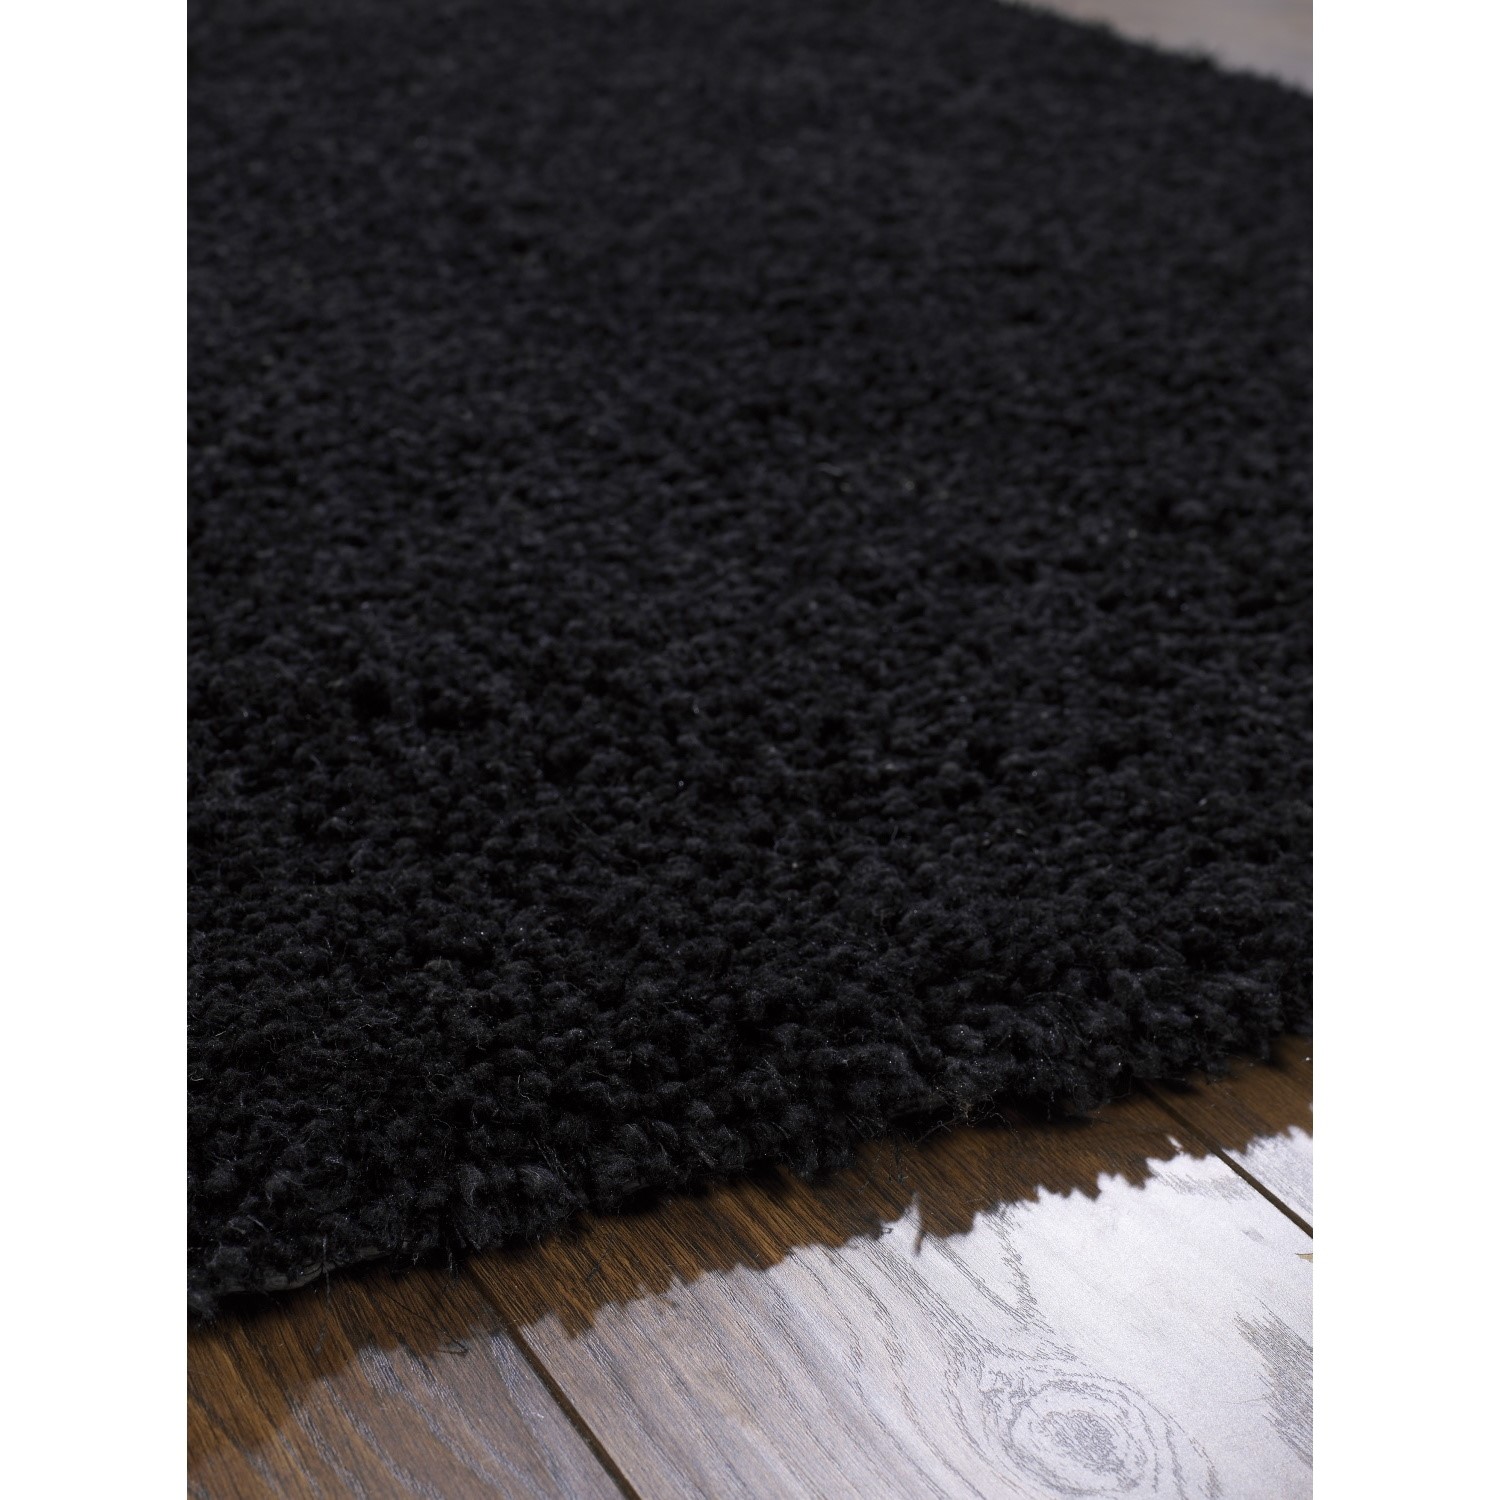 Read more about Round black shaggy rug chicago